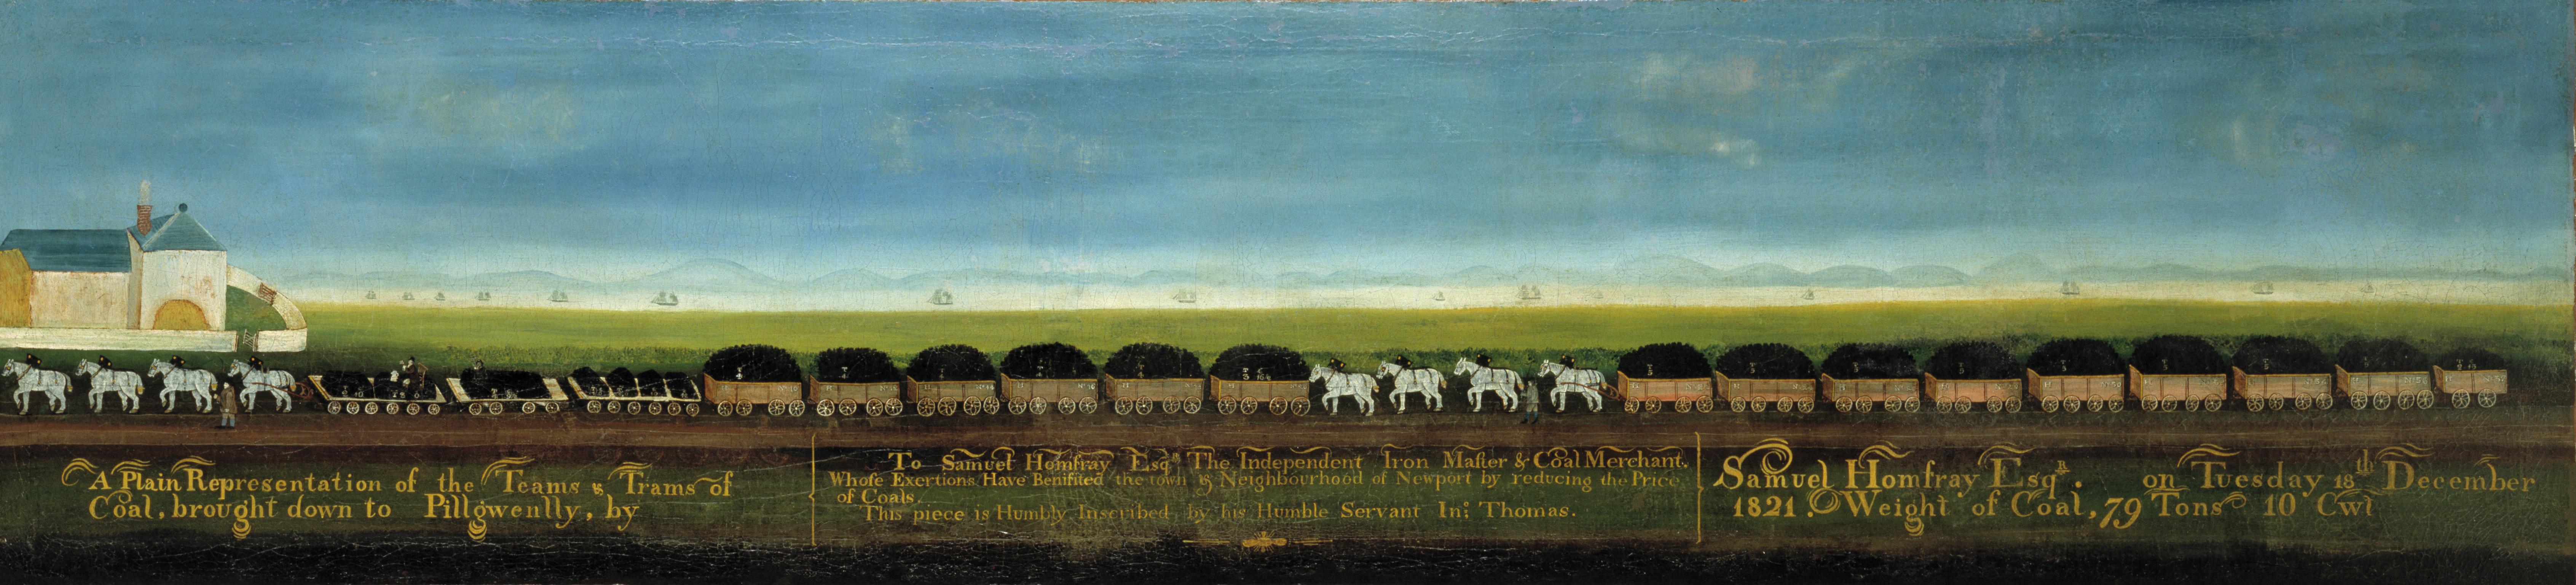 A plain representation of the teams and trams of coal bought down to Pillgwenlly by Samuel Homfray